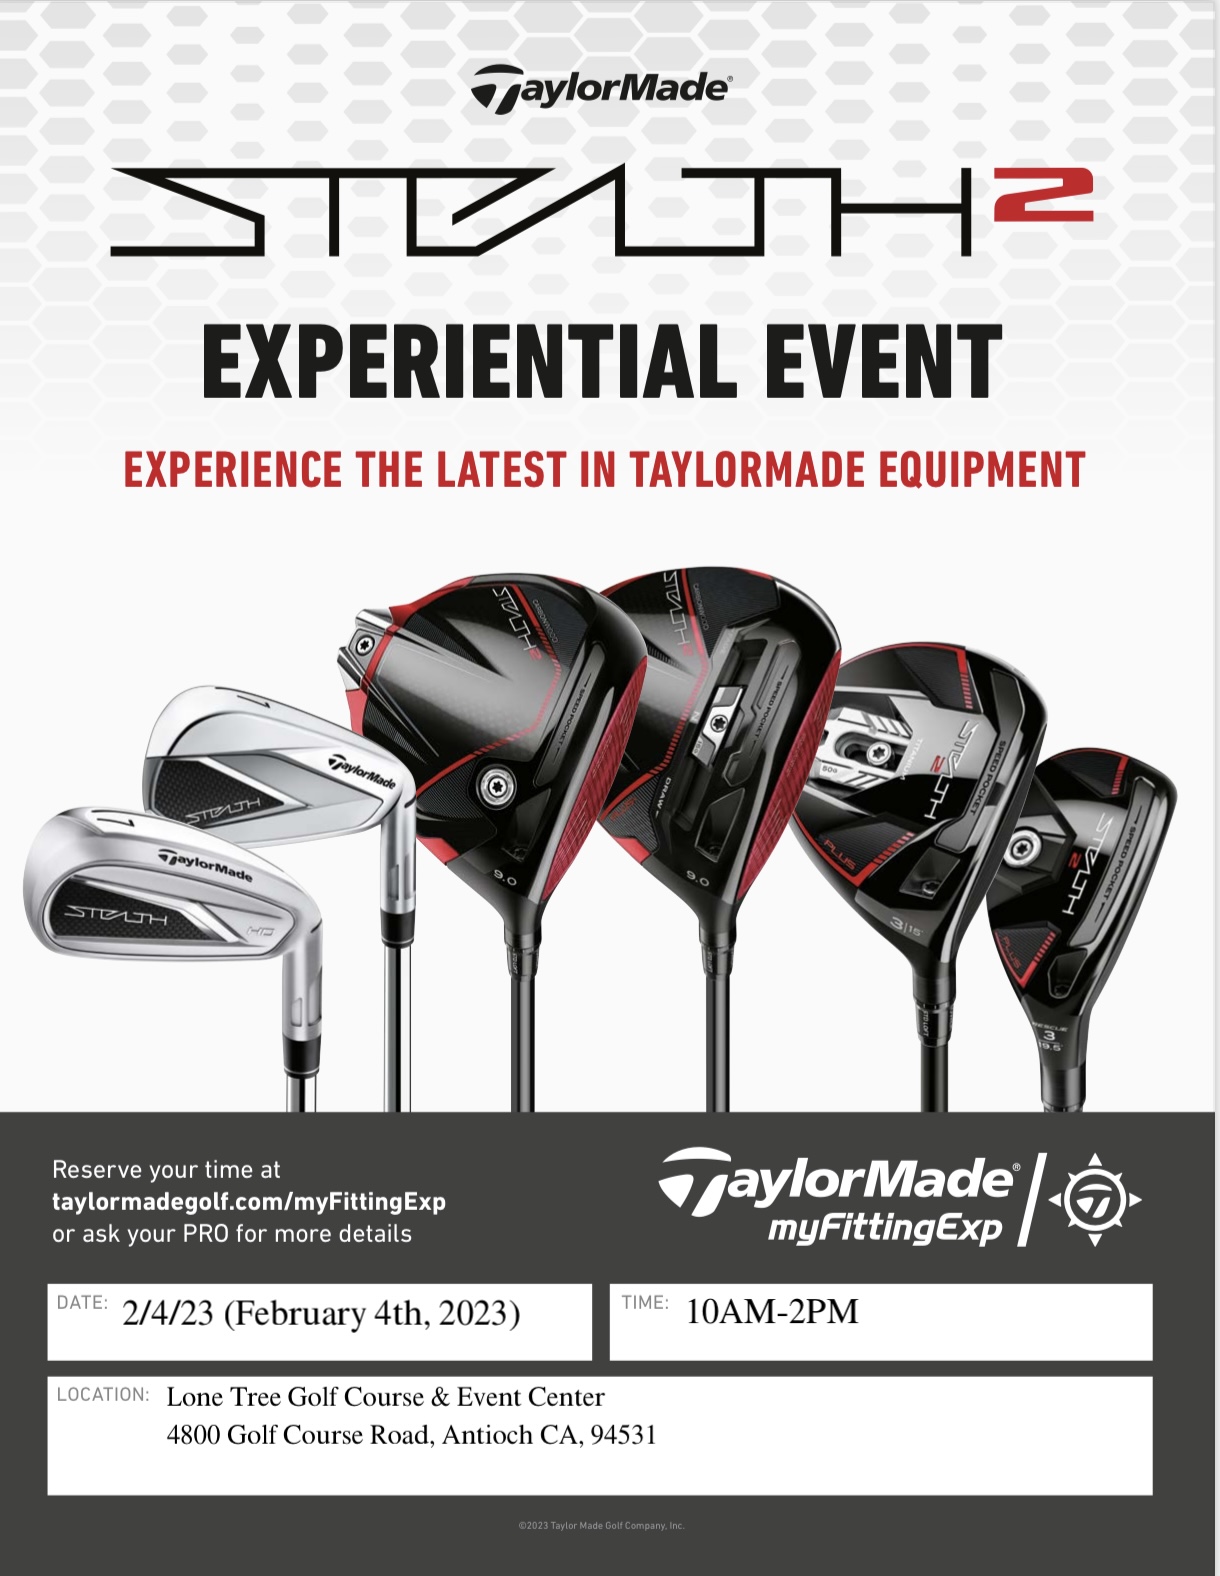 Taylormade Pic